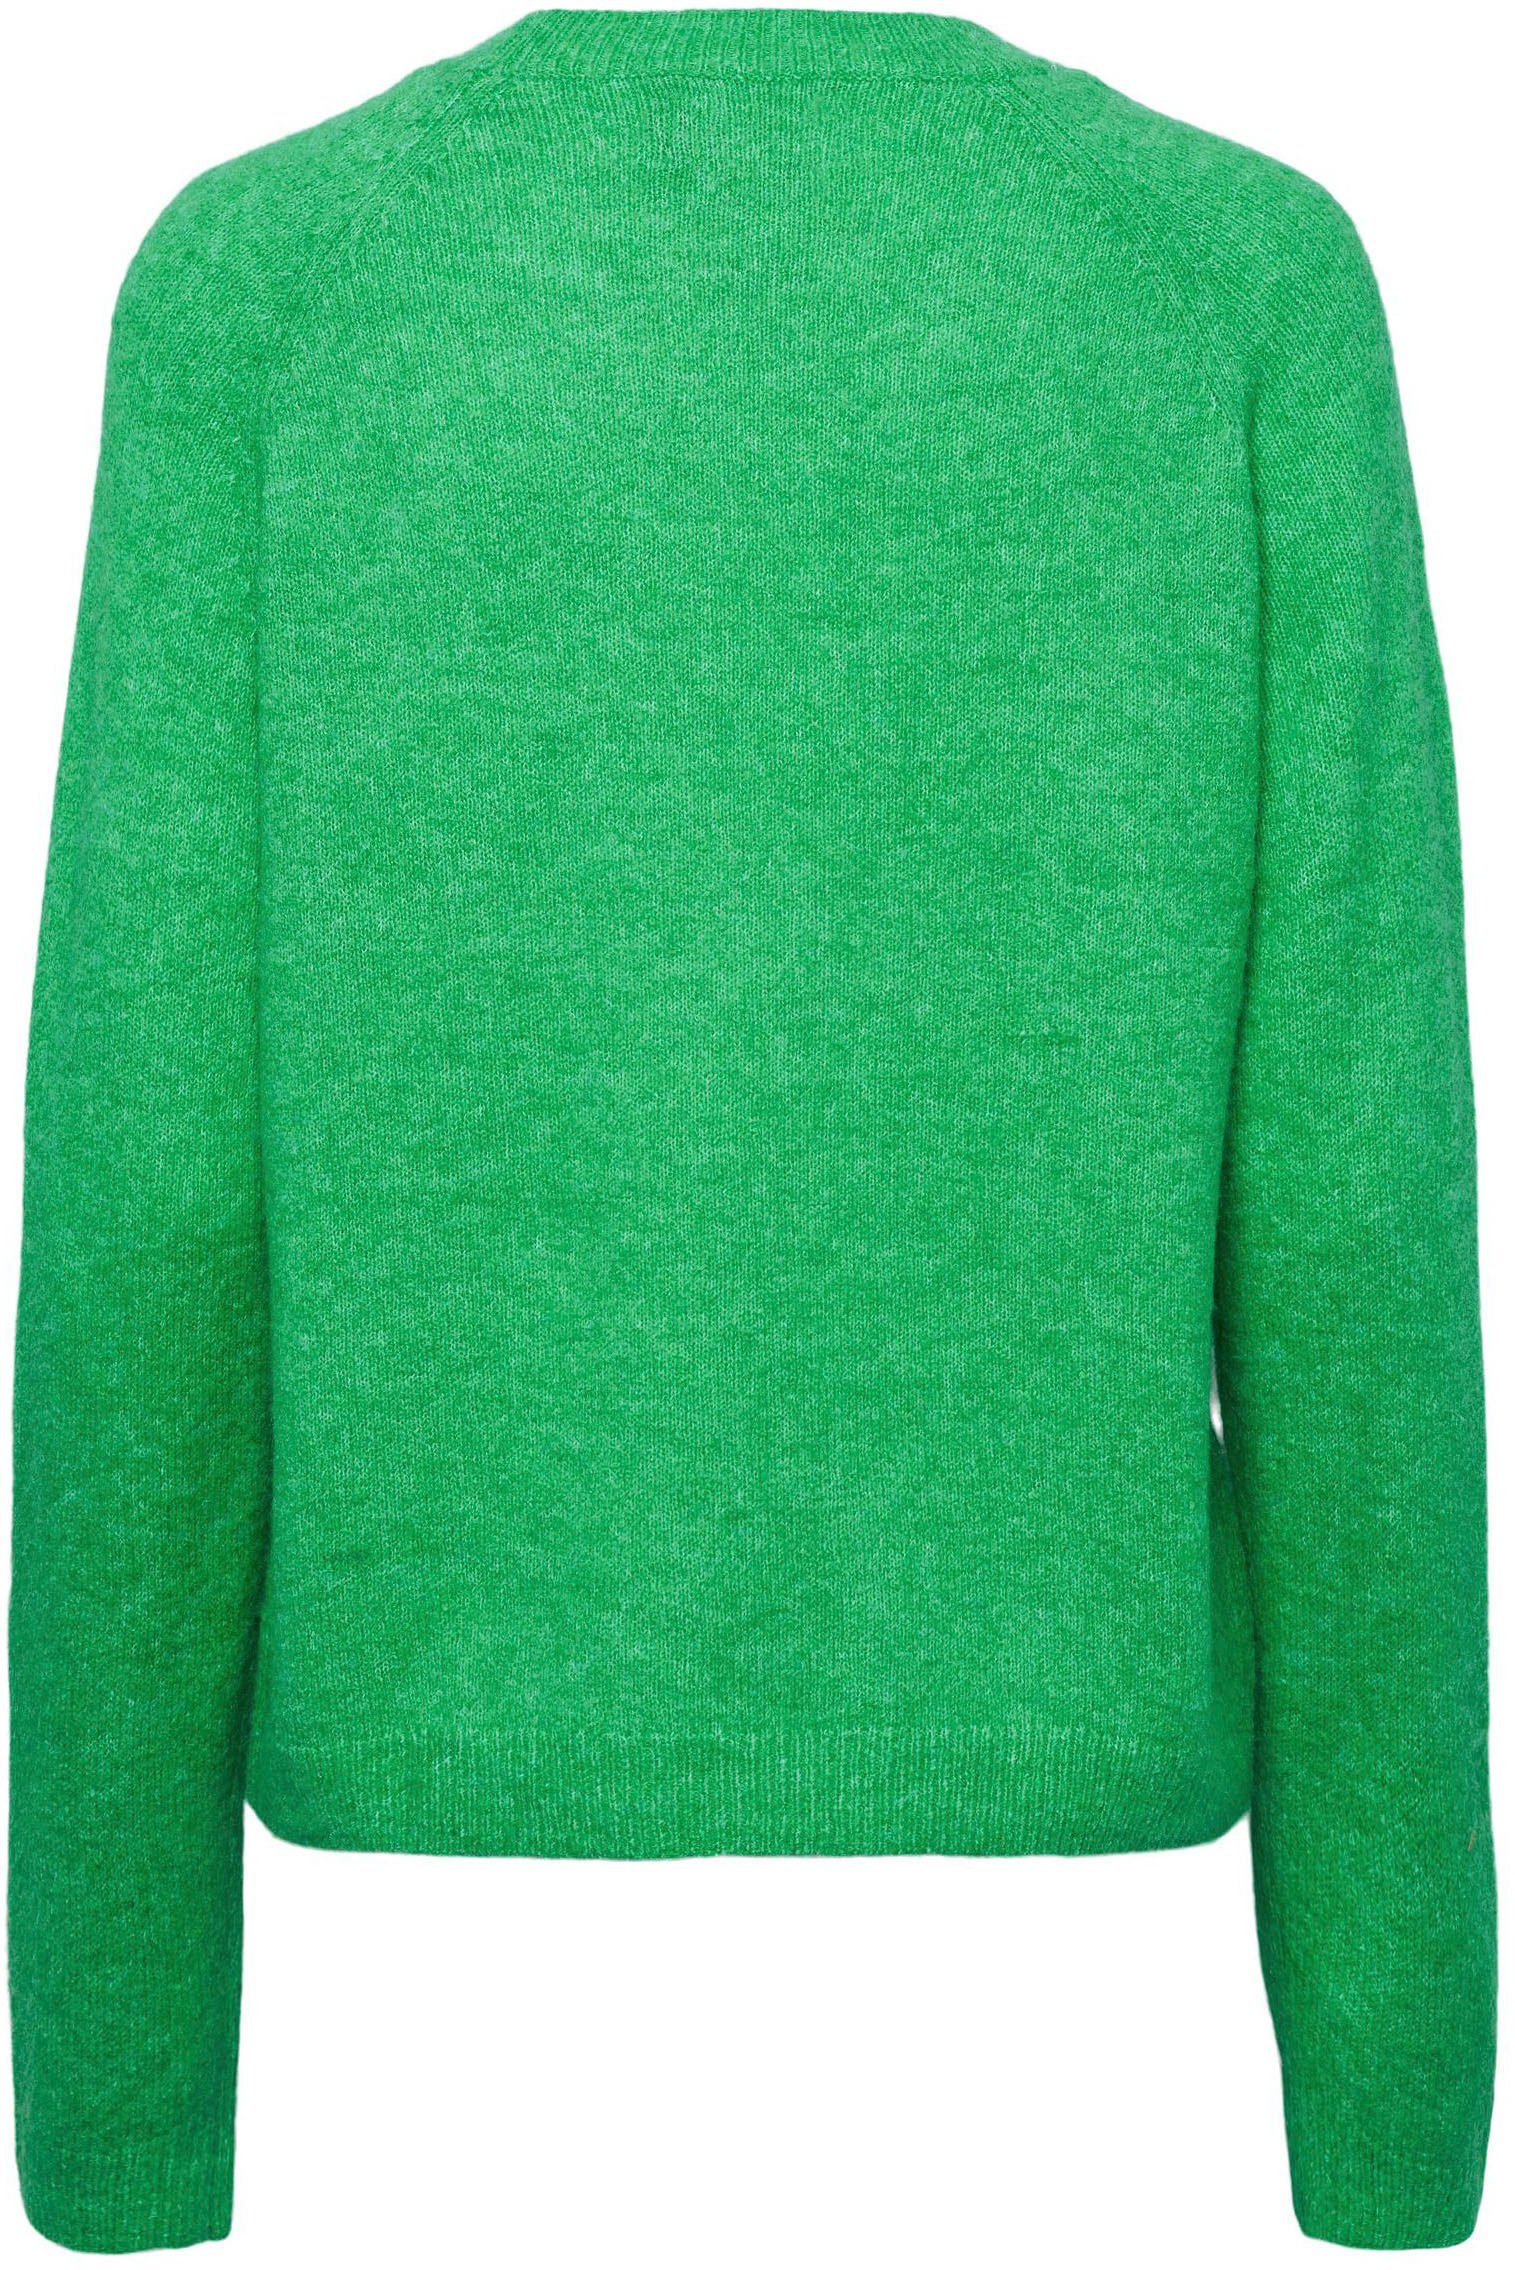 pieces Strickpullover PCJULIANA BC Mint LS NOOS O-NECK KNIT